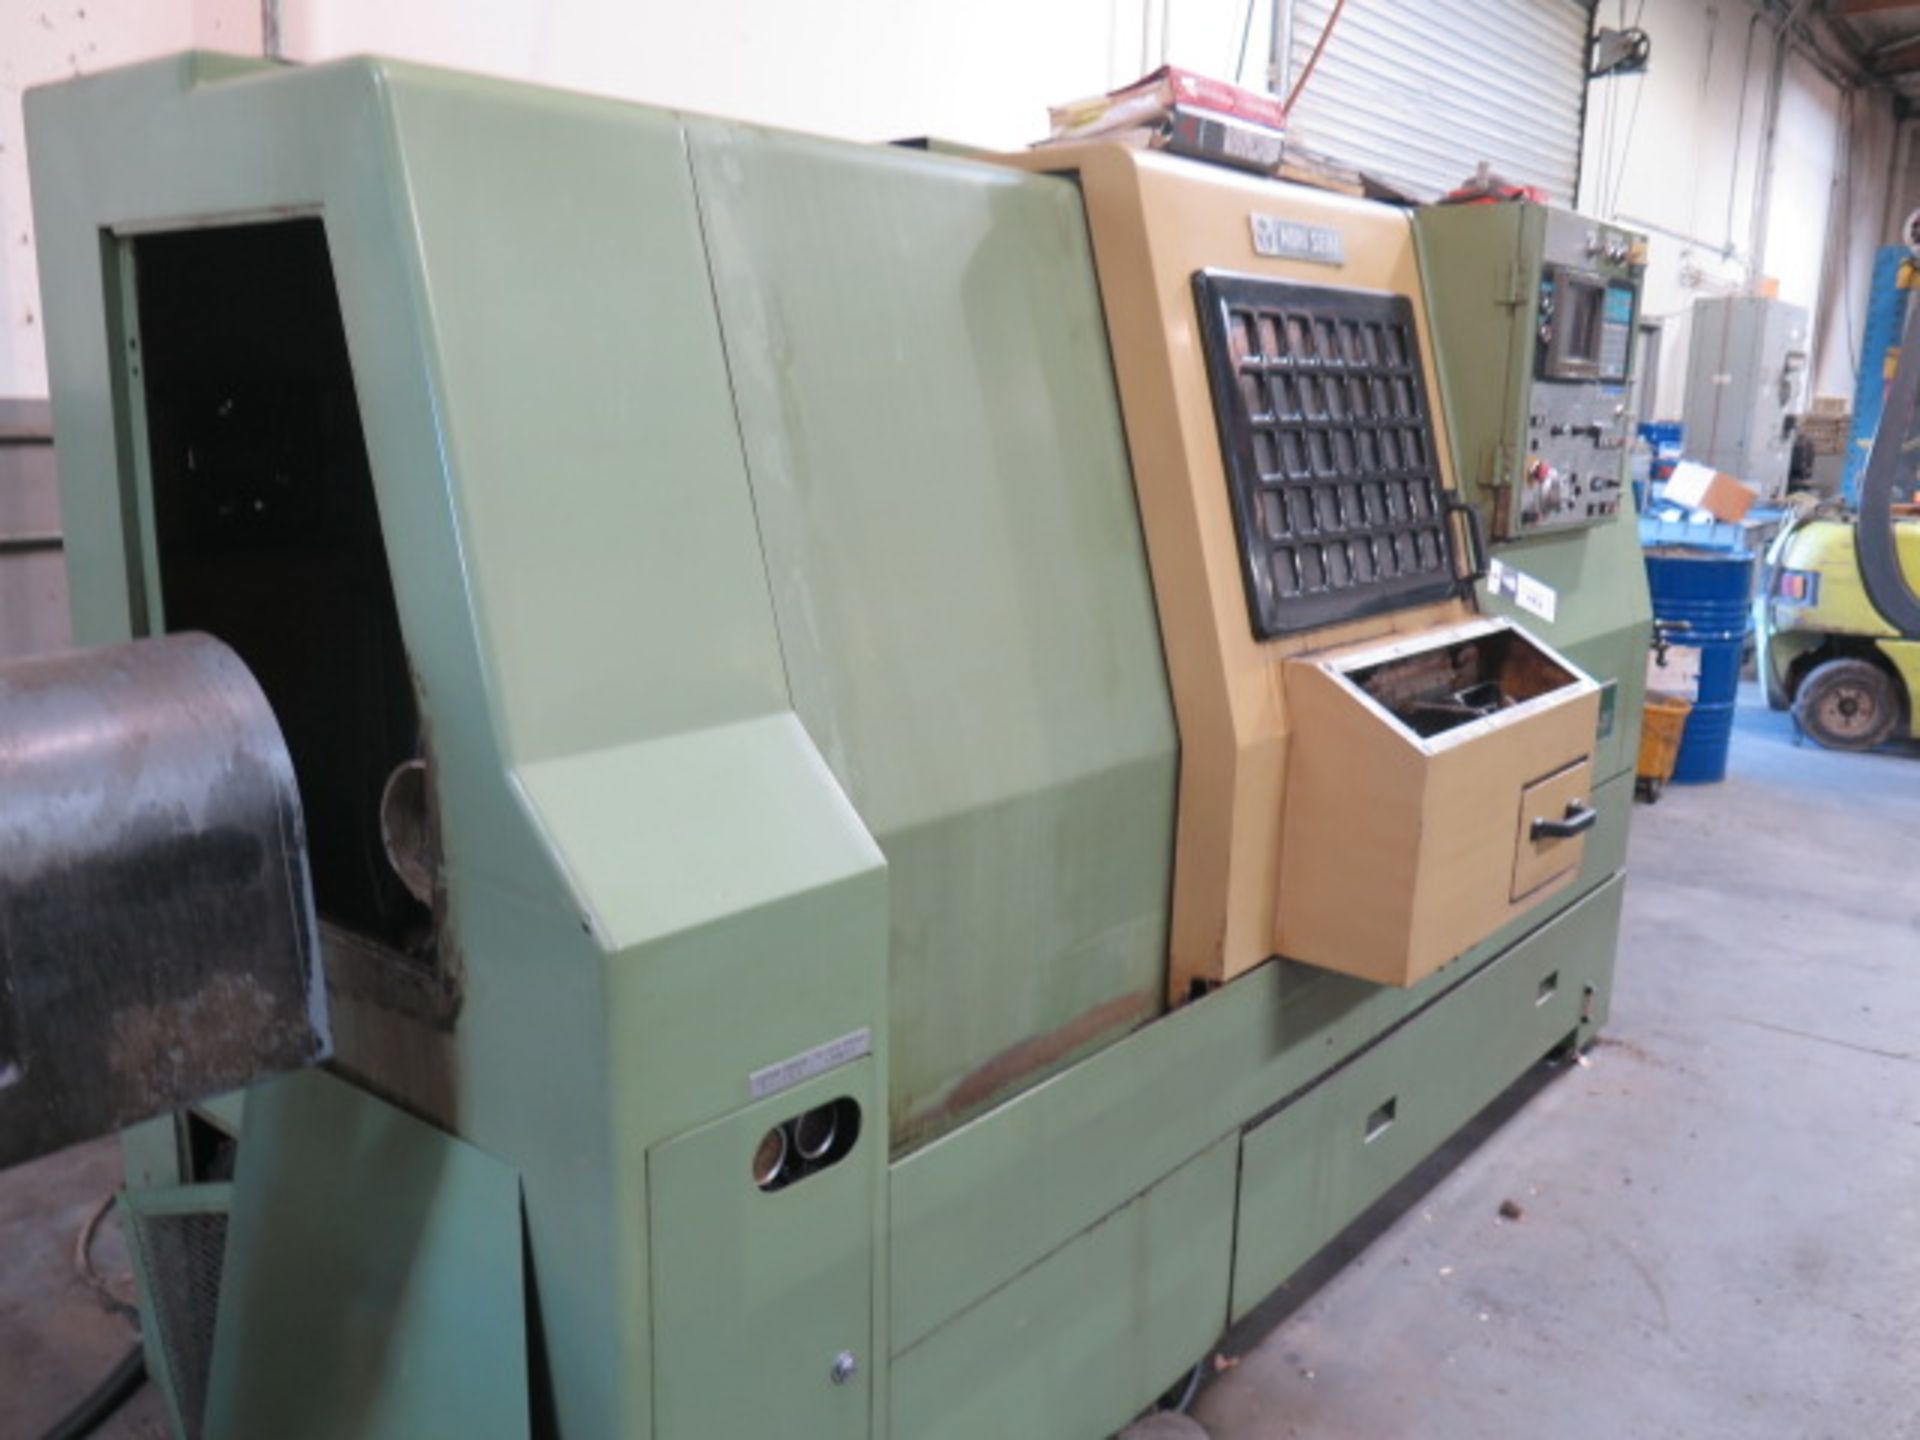 Mori Seiki SL-25 CNC Turning Center s/n 3178 w/ Yasnac Controls, 10-Station, Hydraulic, SOLD AS IS - Image 3 of 11